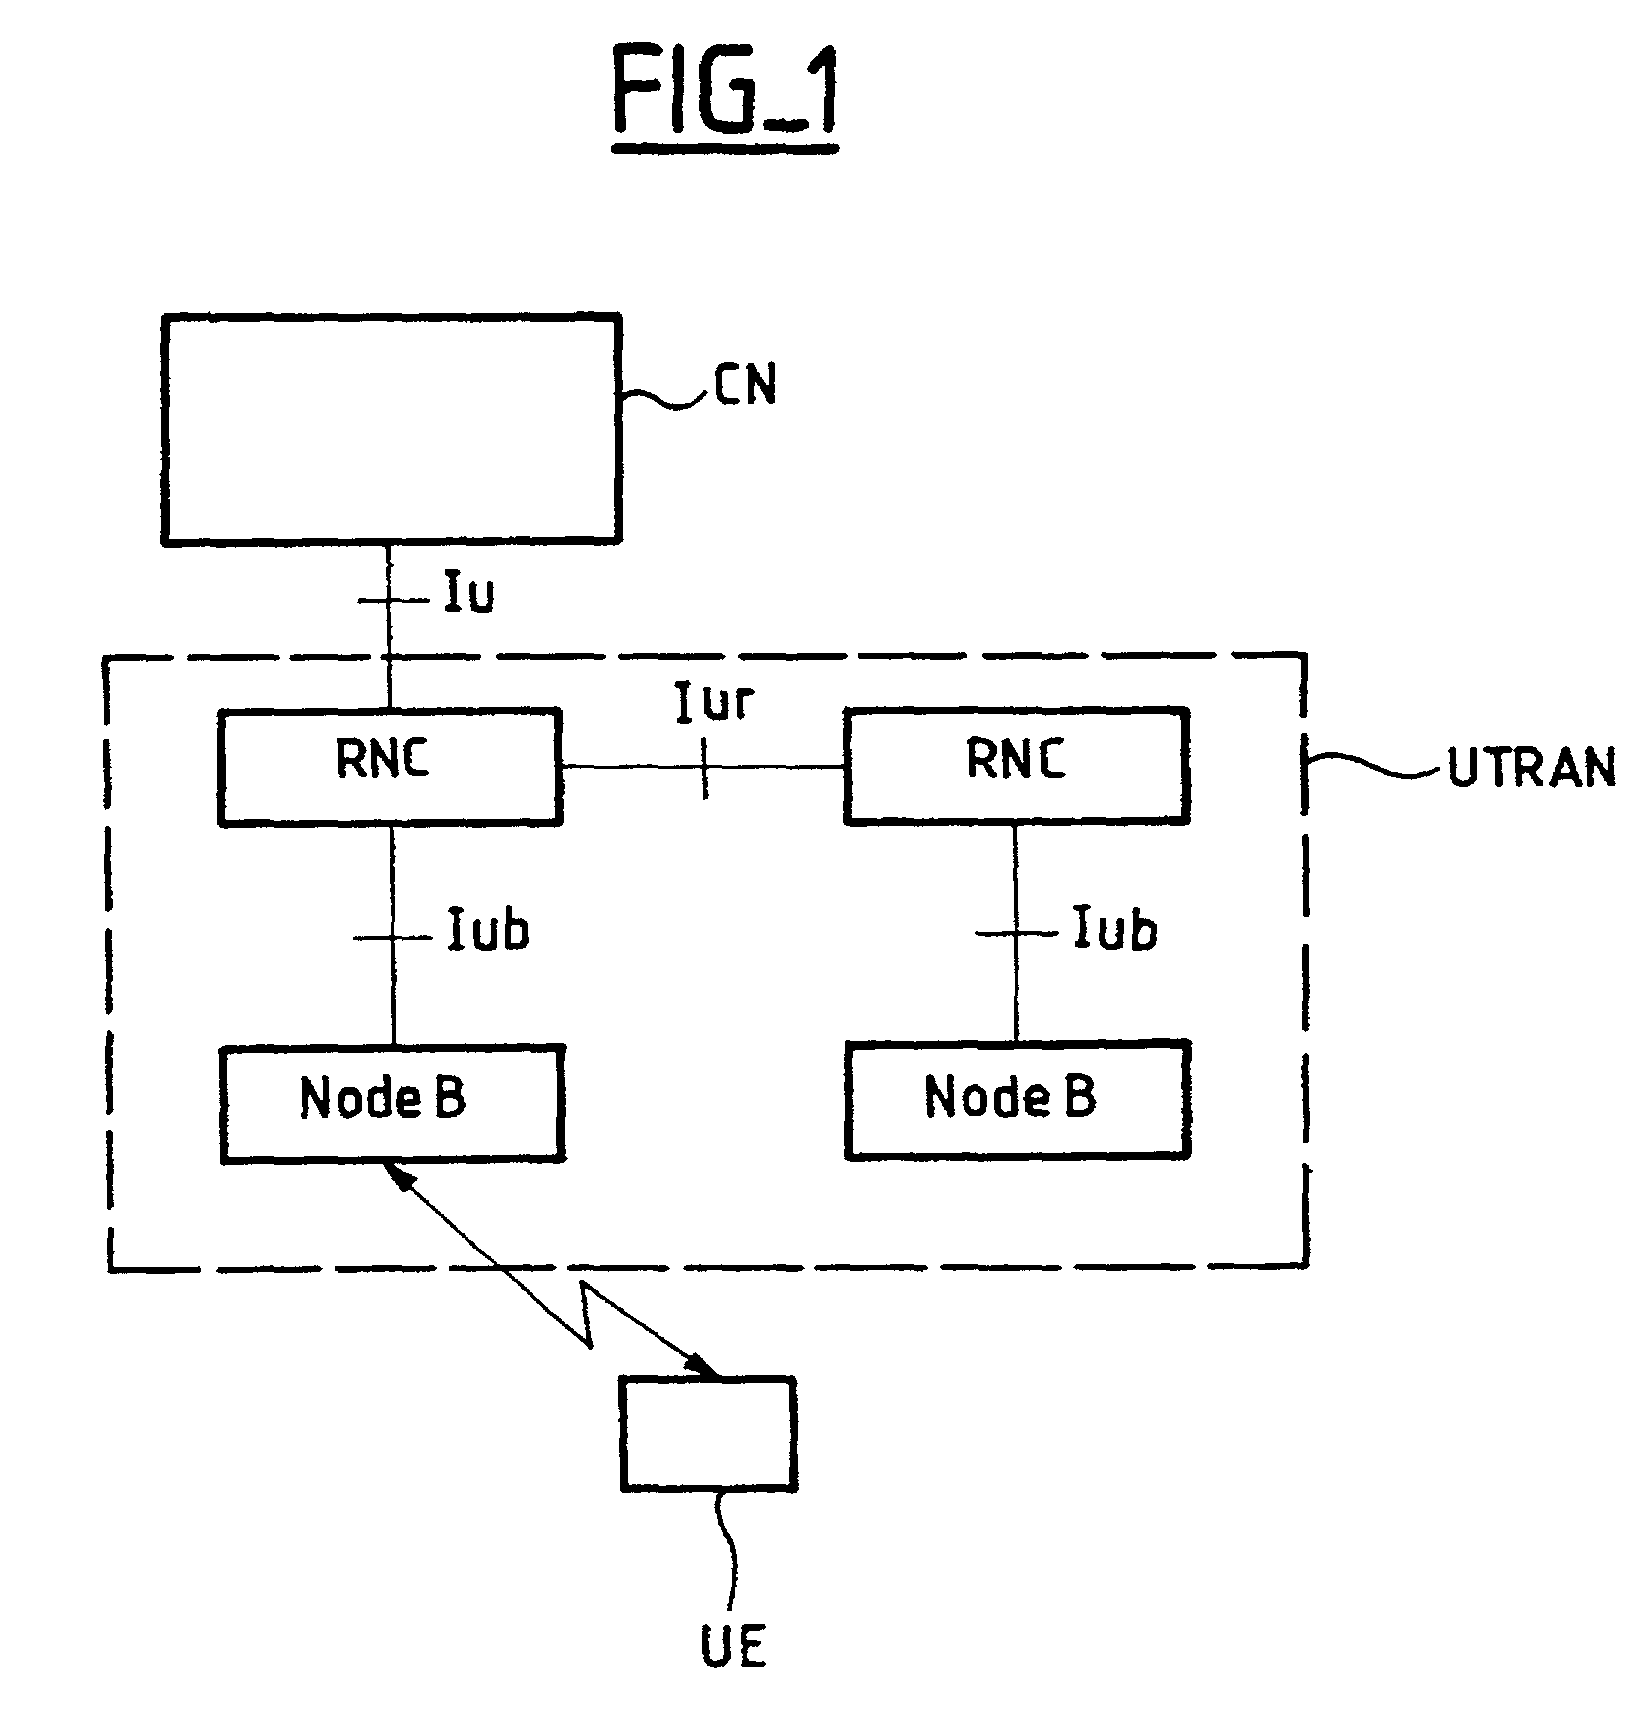 Method of managing processing resources in a mobile radio system